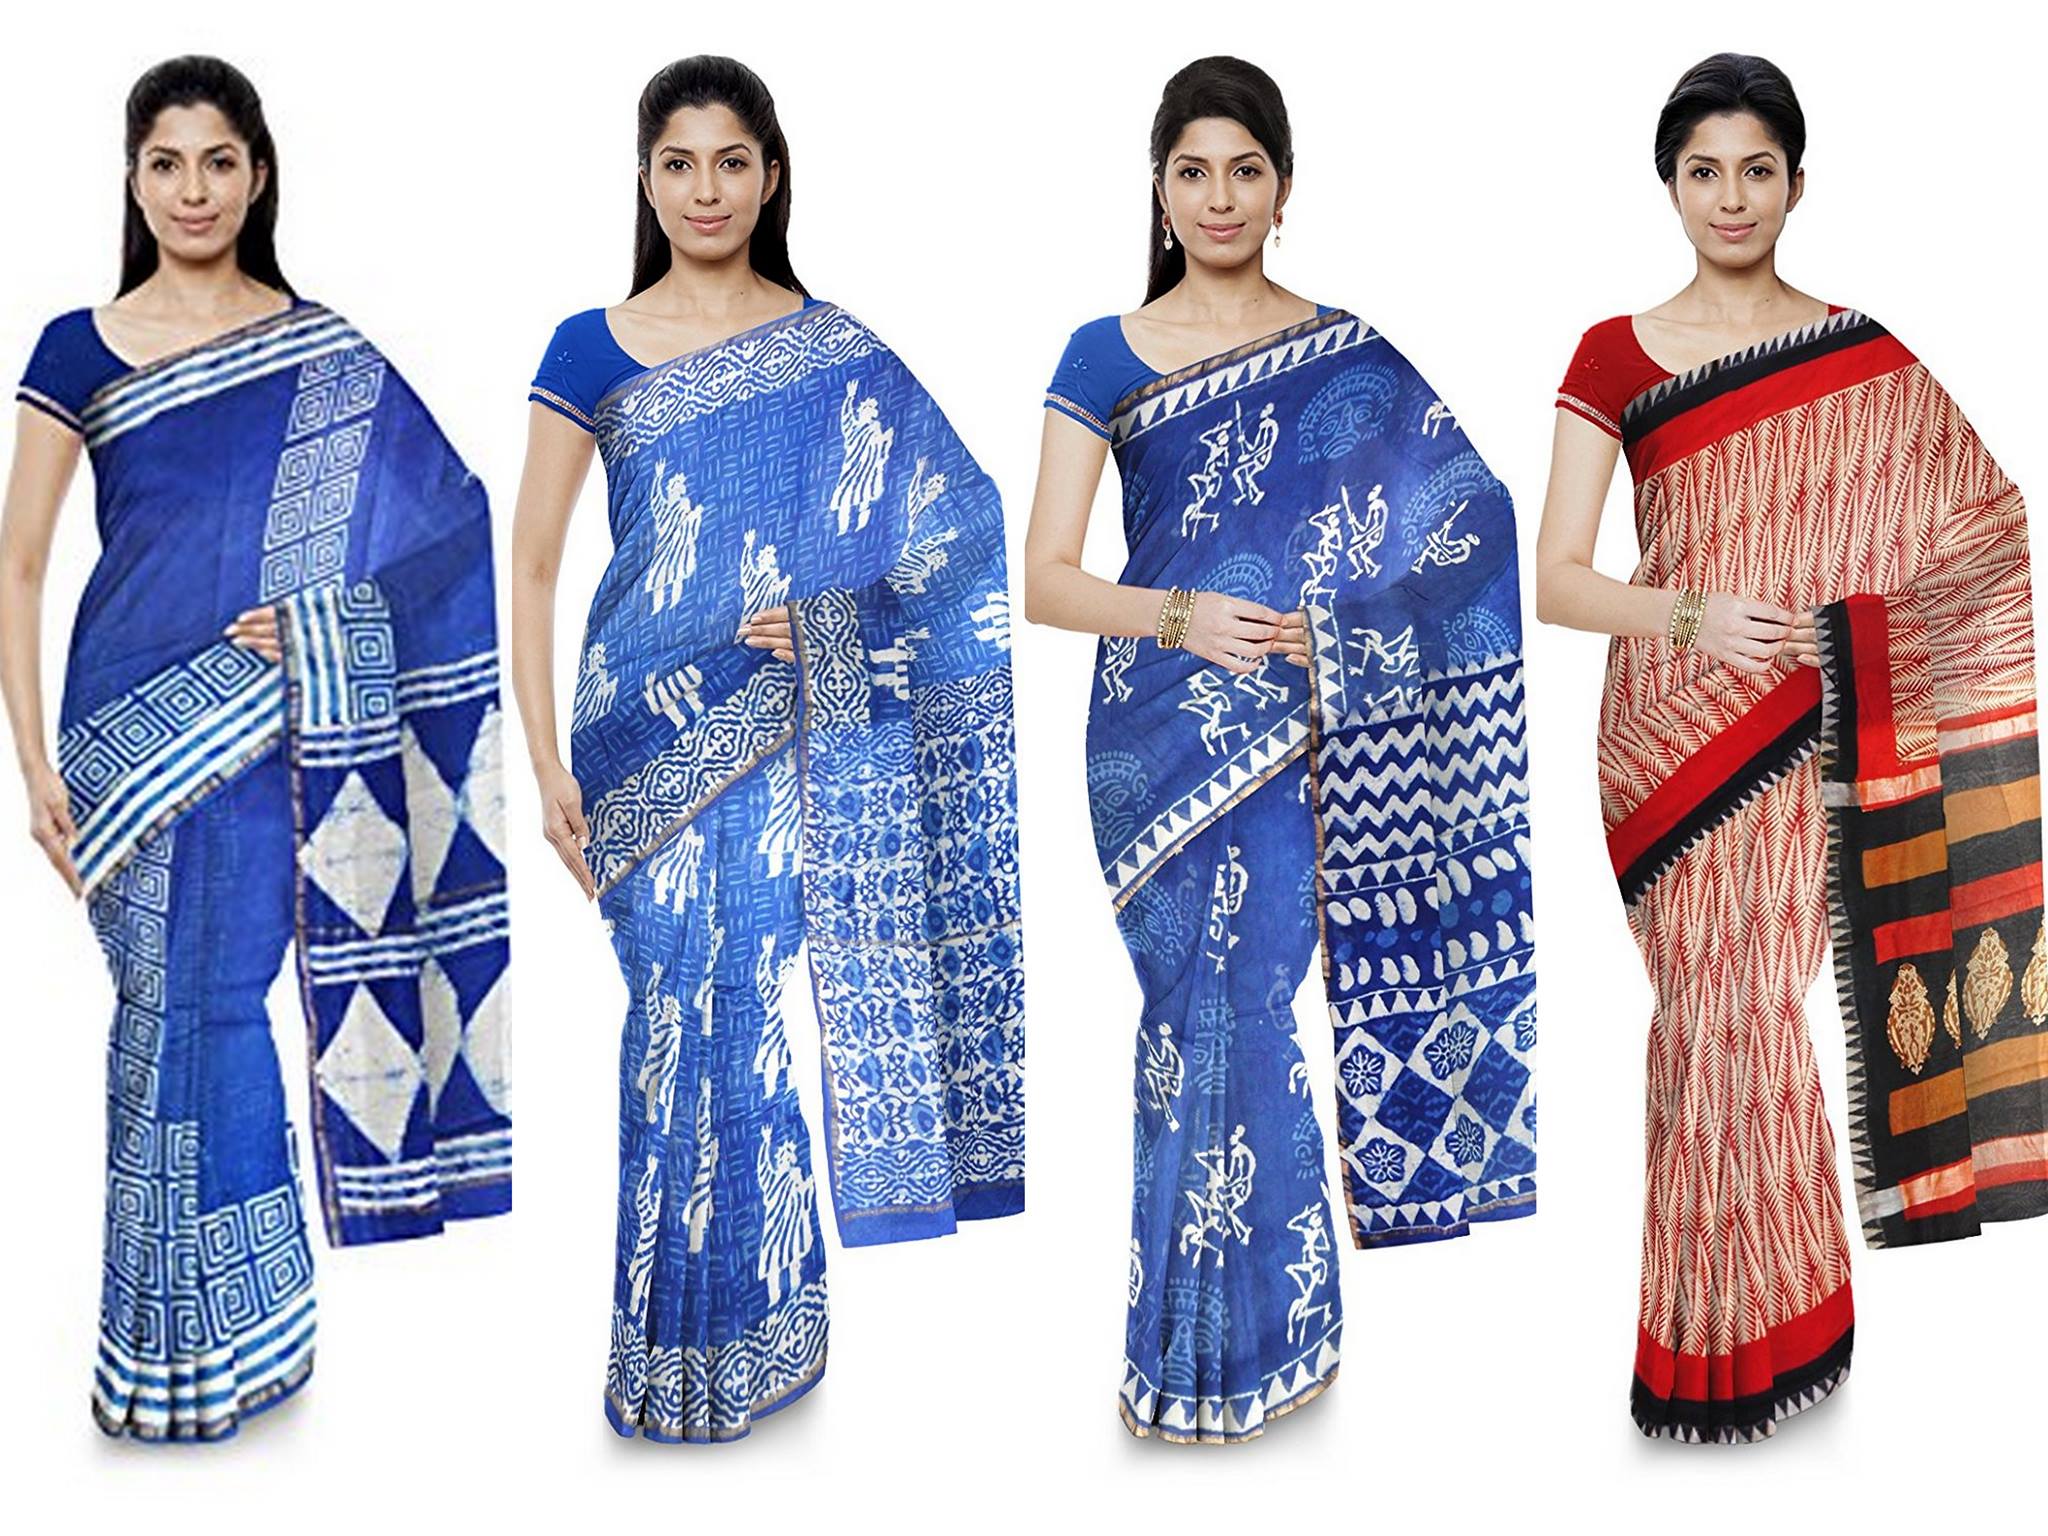 Indian Saree Manufacturers boosting home production capacity